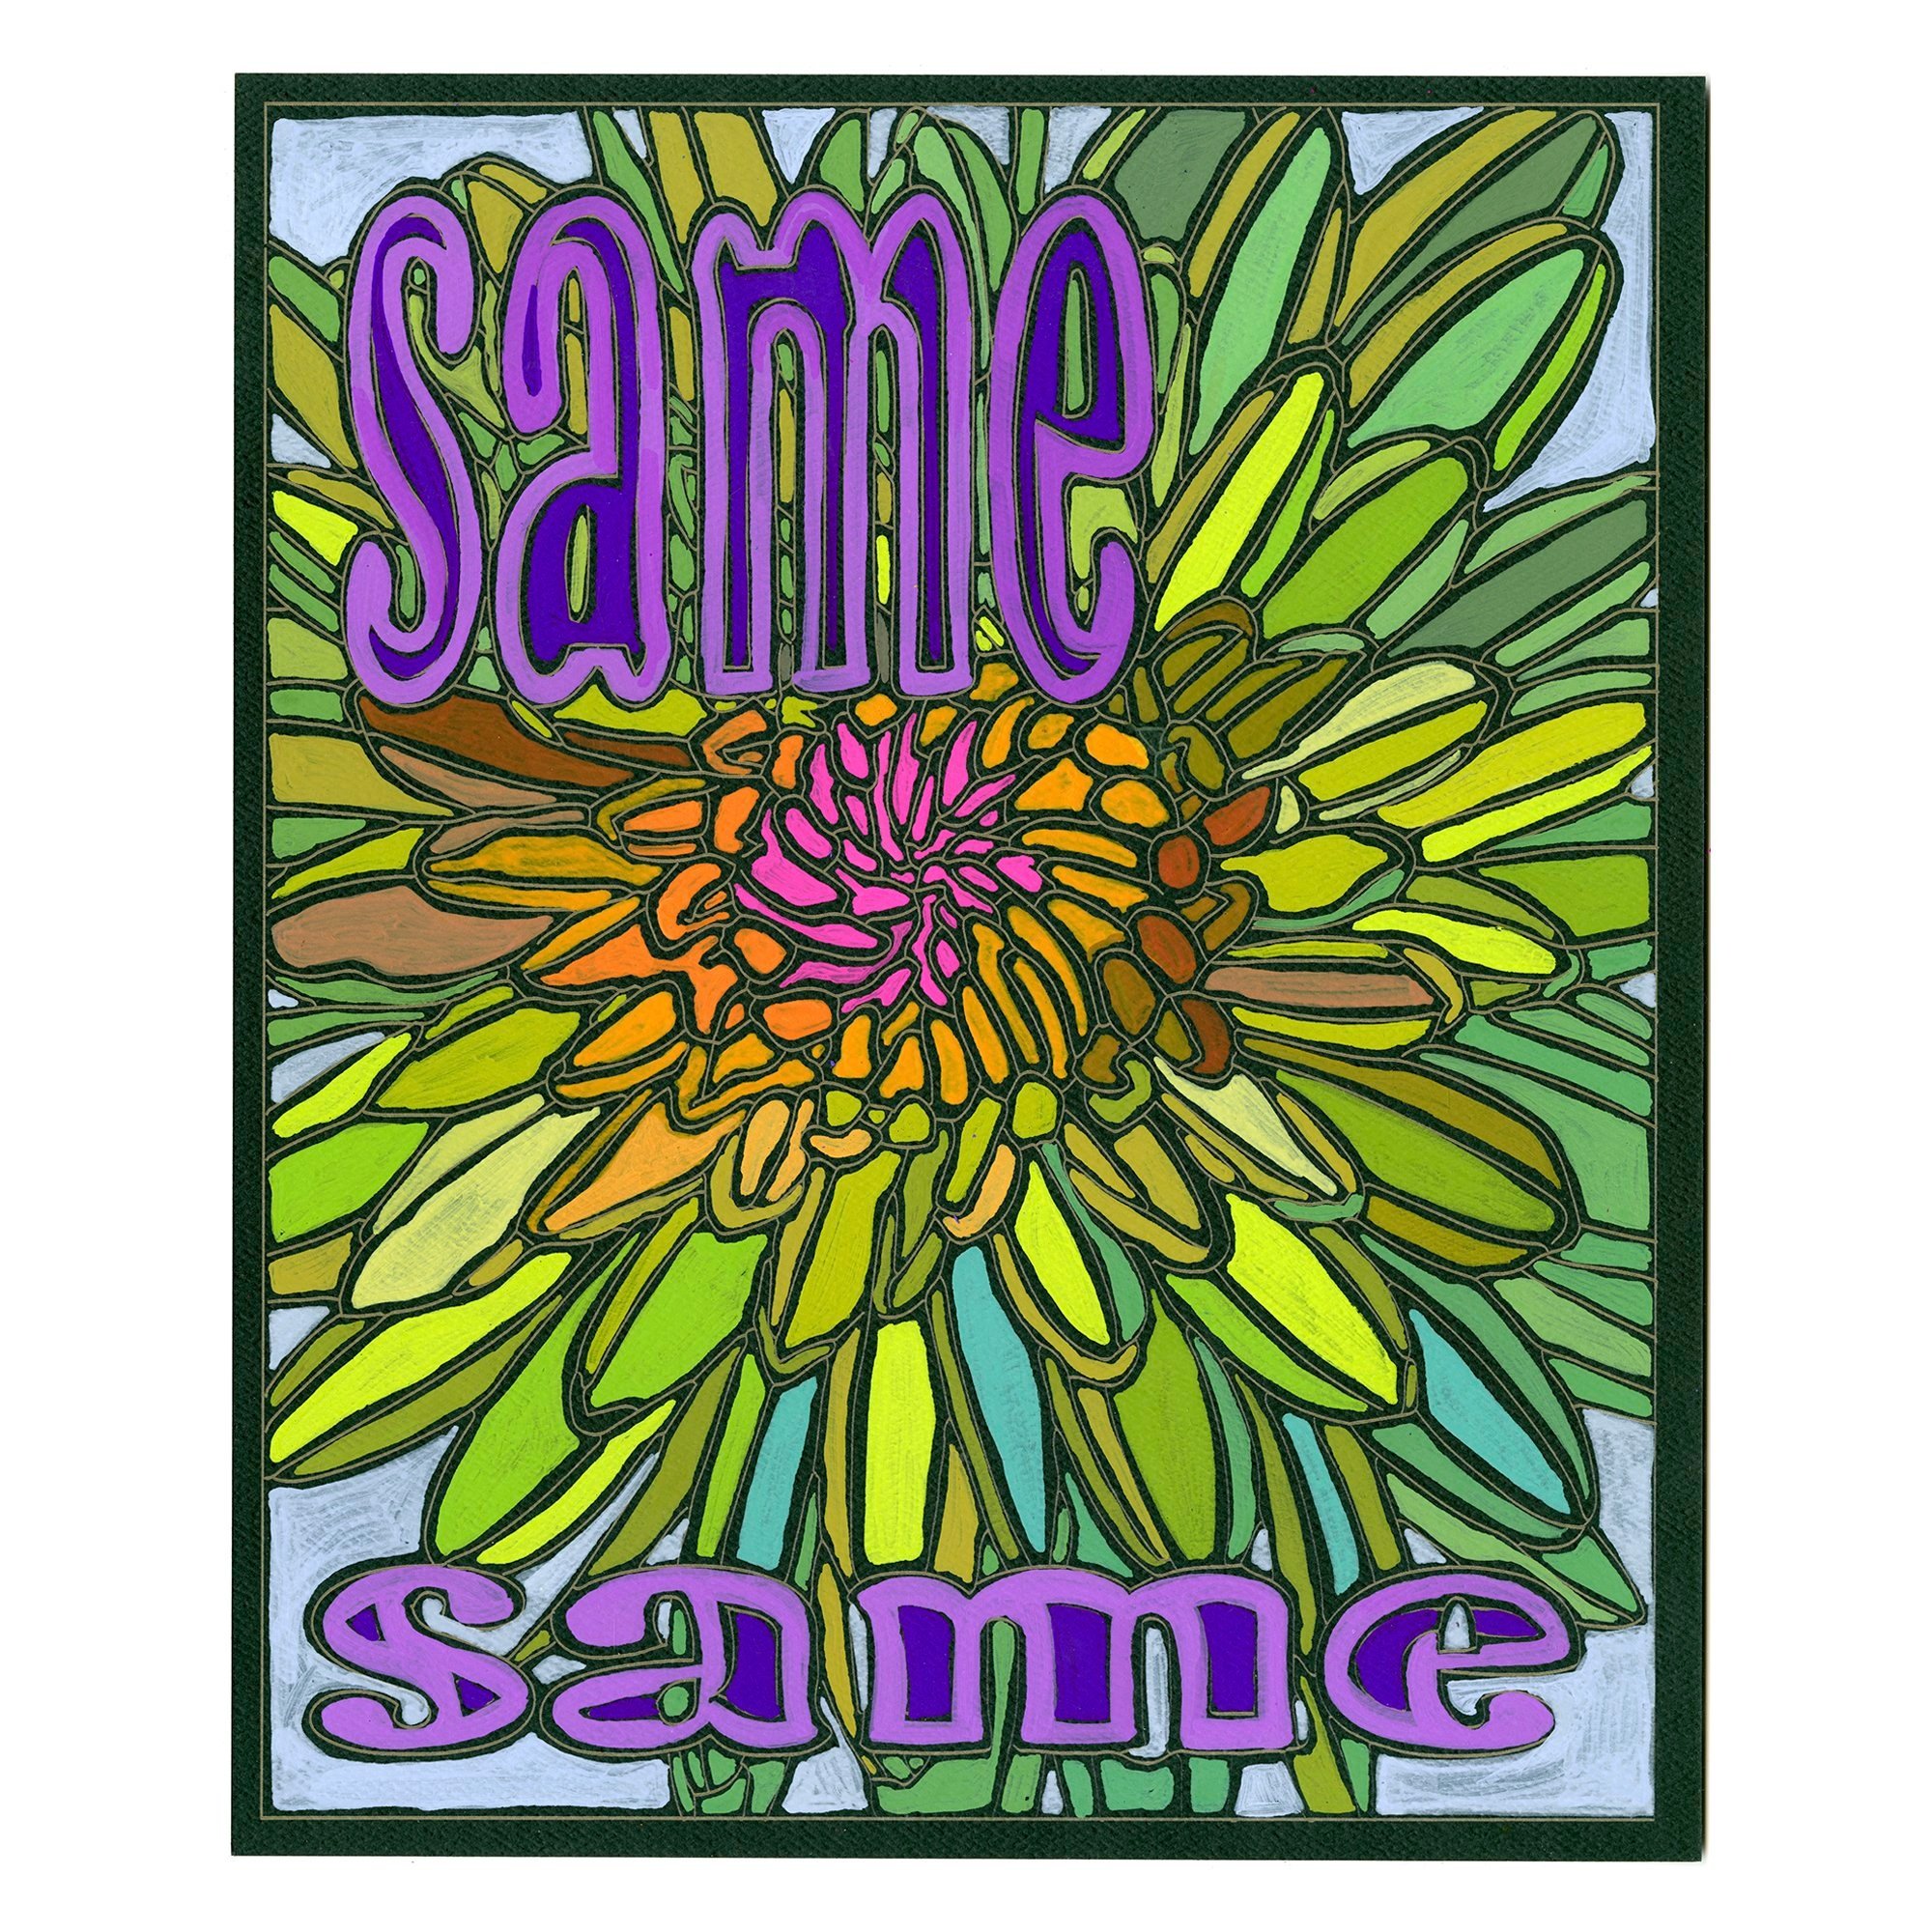   same same  (2022); gouache on laser-etched paper, 9 by 11 inches.  